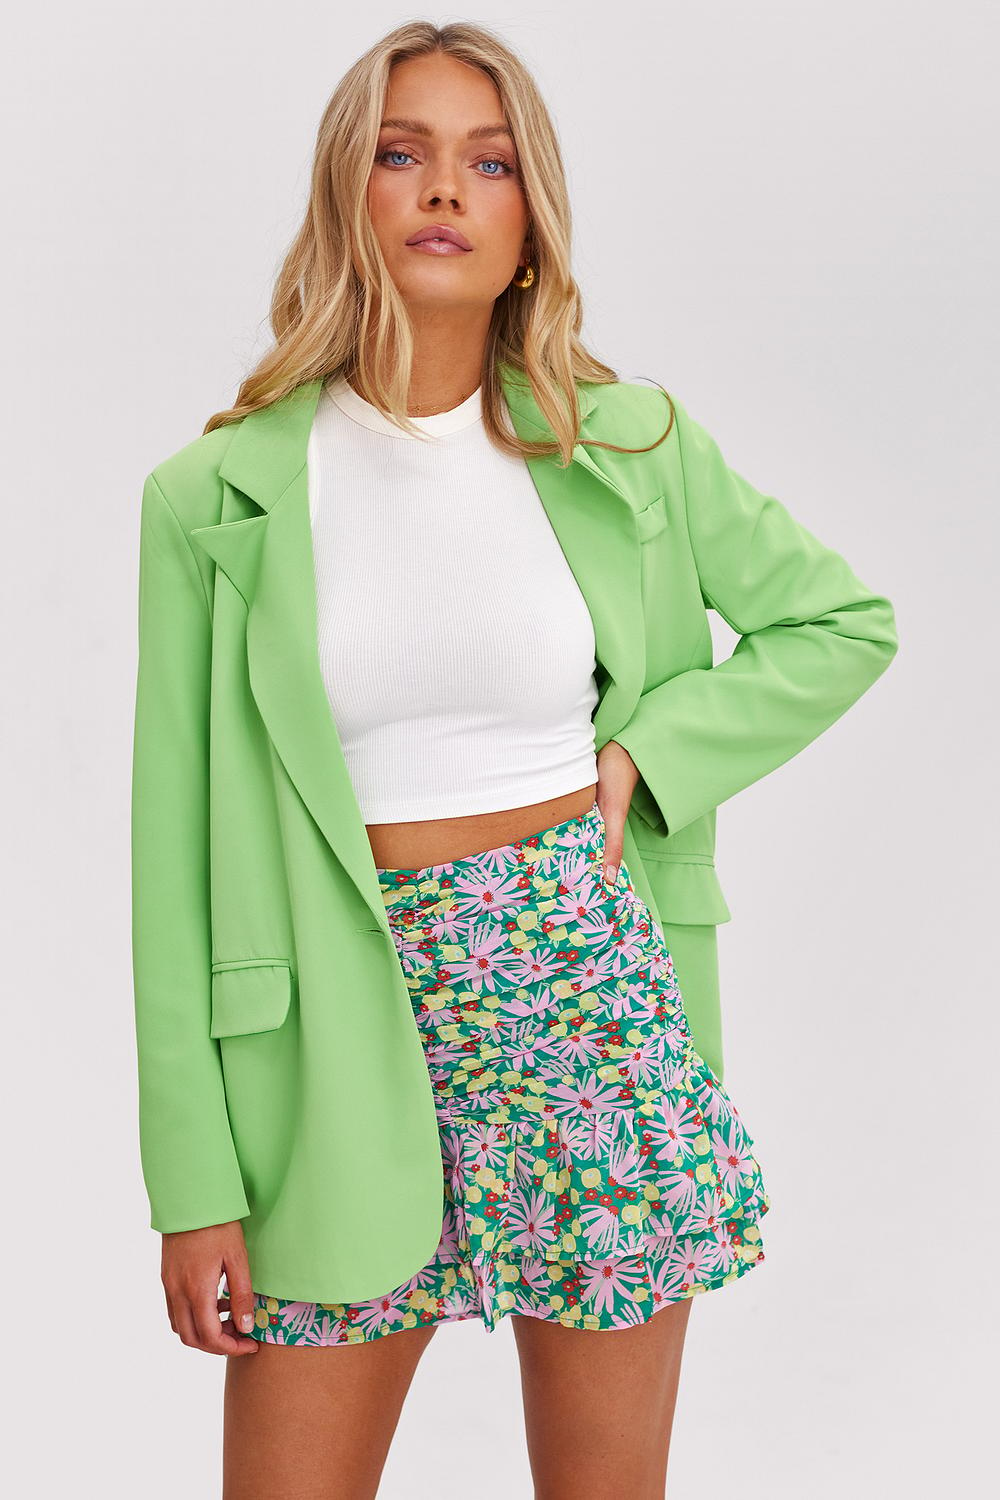 Green skirt with floral print